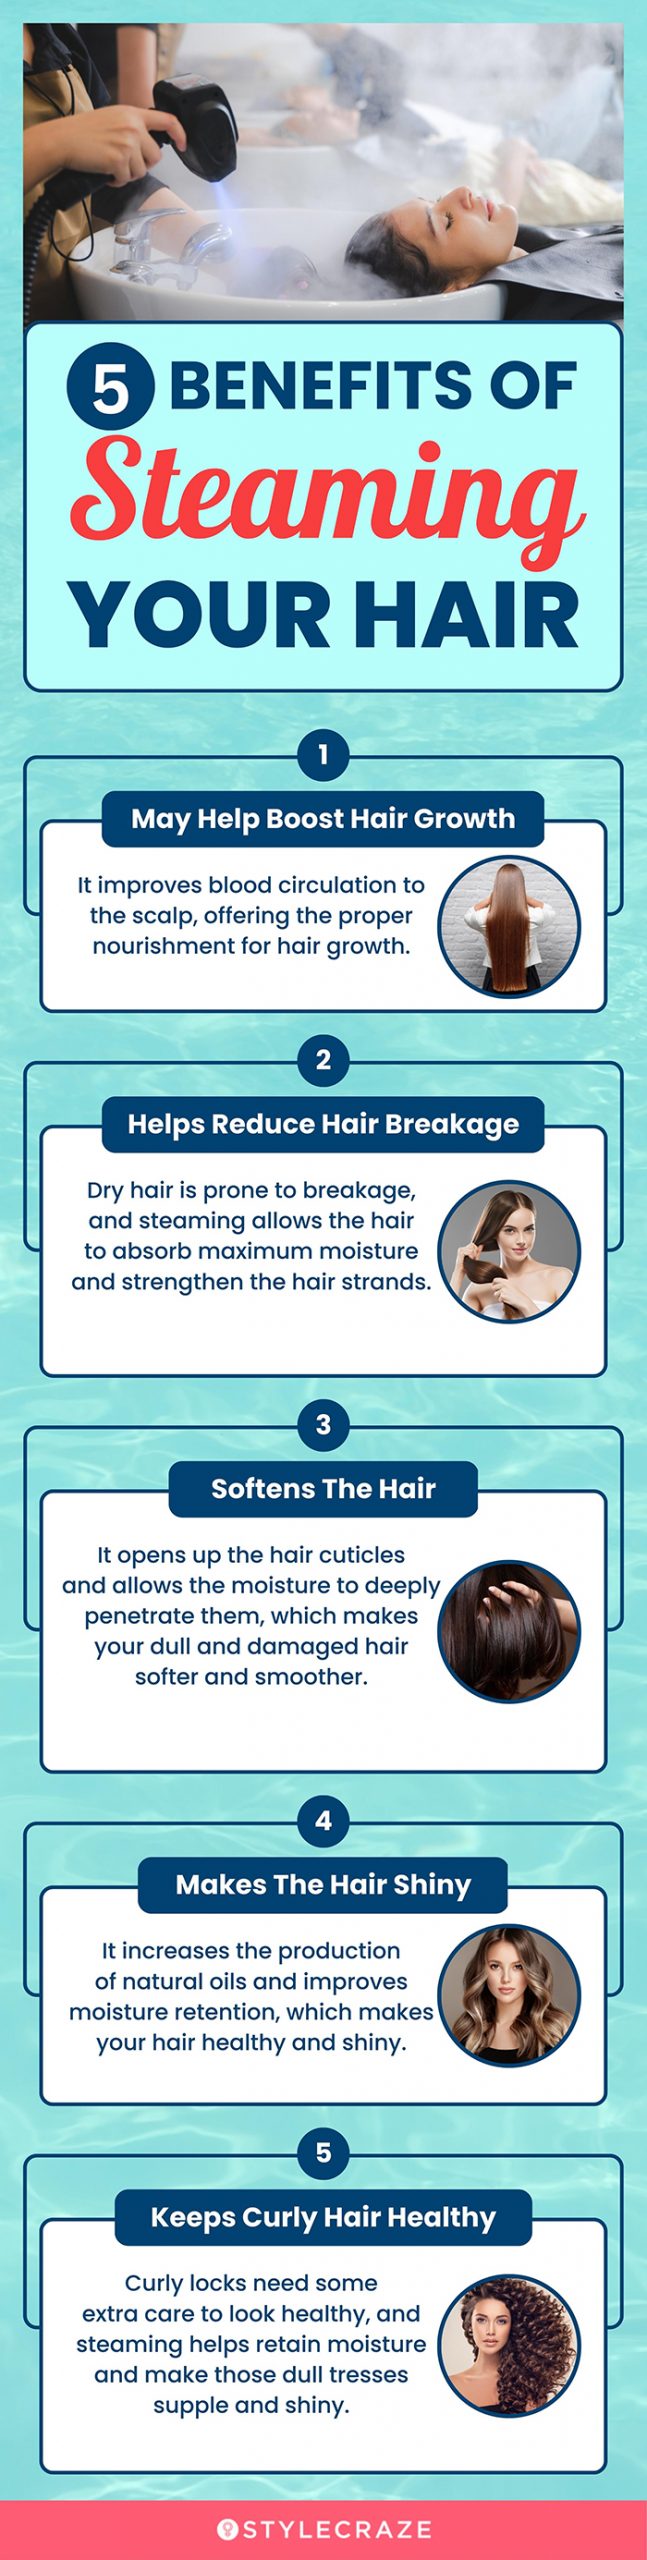 5 benefits of steaming your hair (infographic)